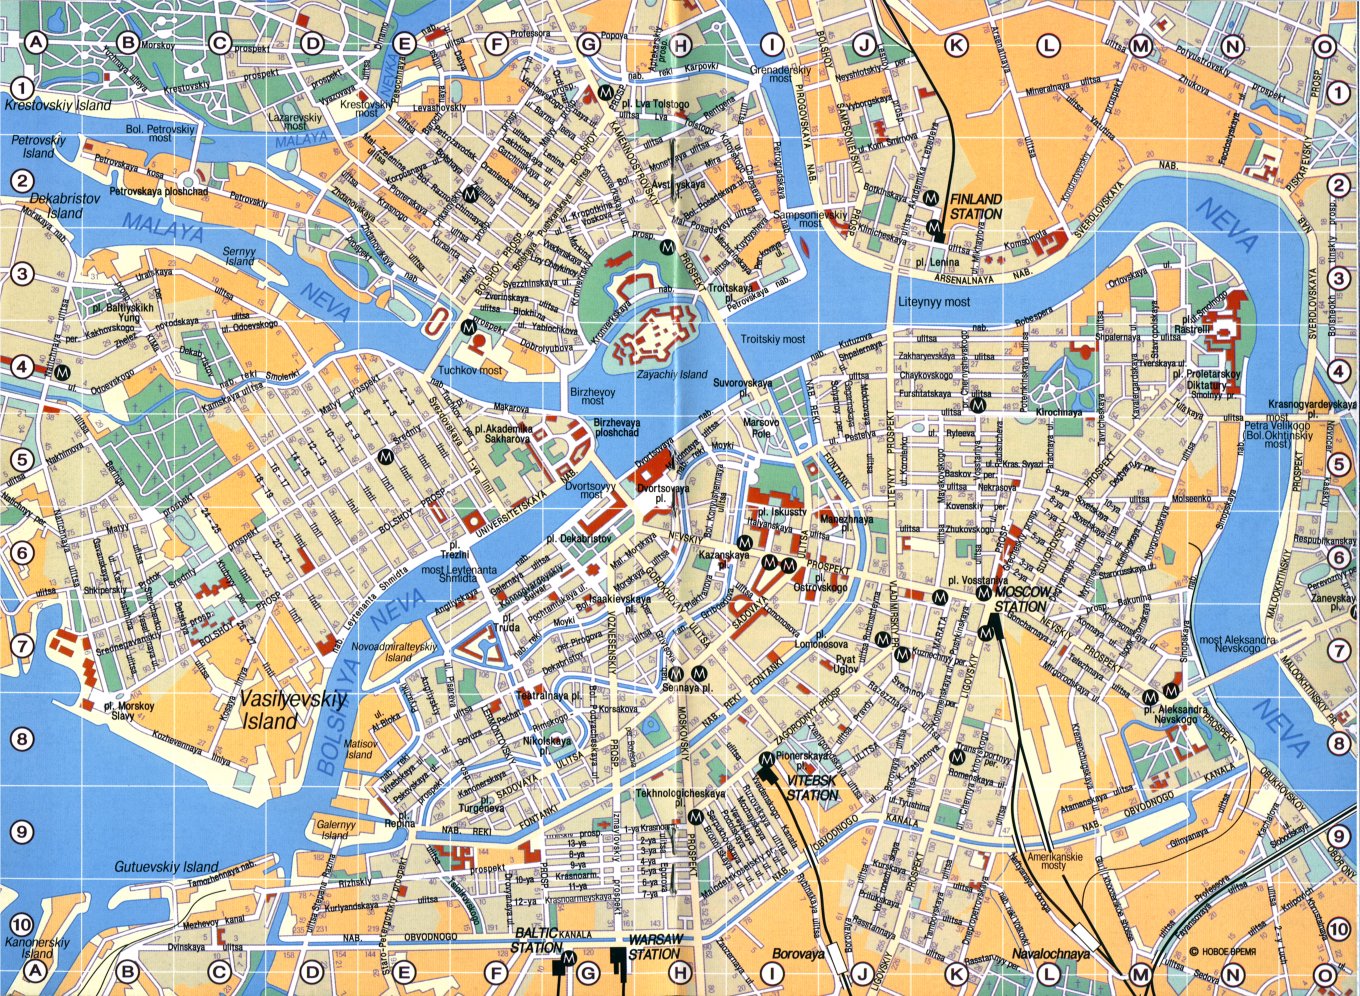 Map of the center of St. Petersburg.